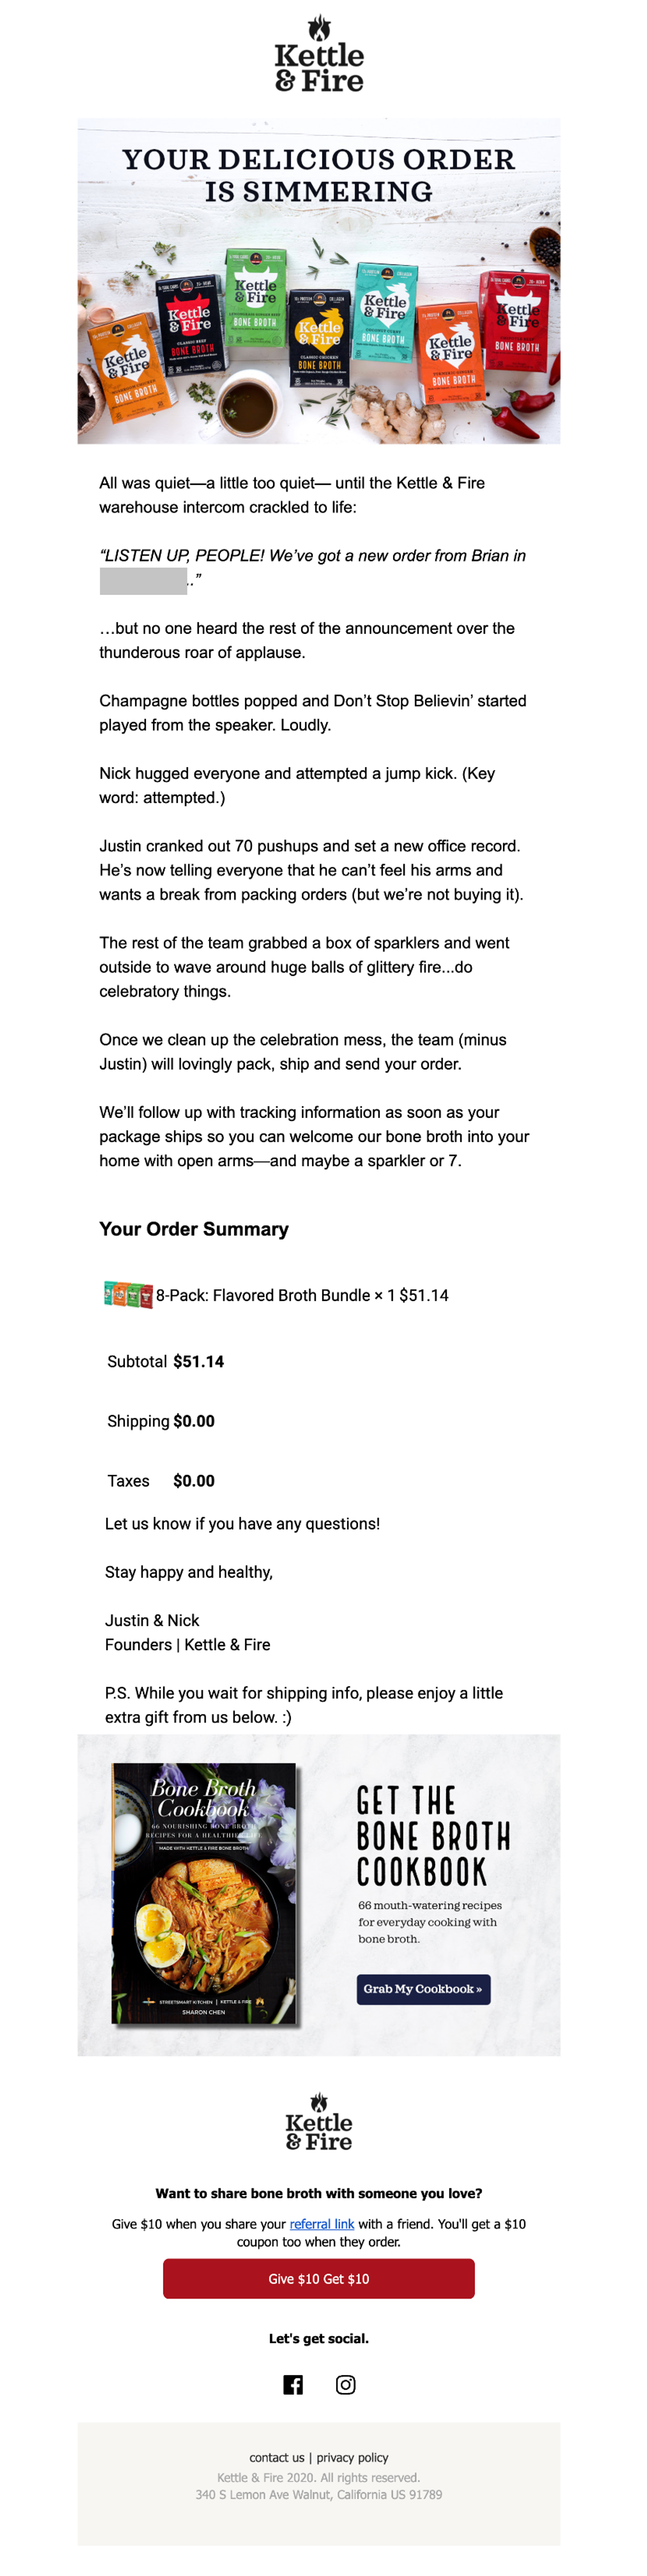 Kettle & Fire Order Confirmation Food and Beverage Email Template 